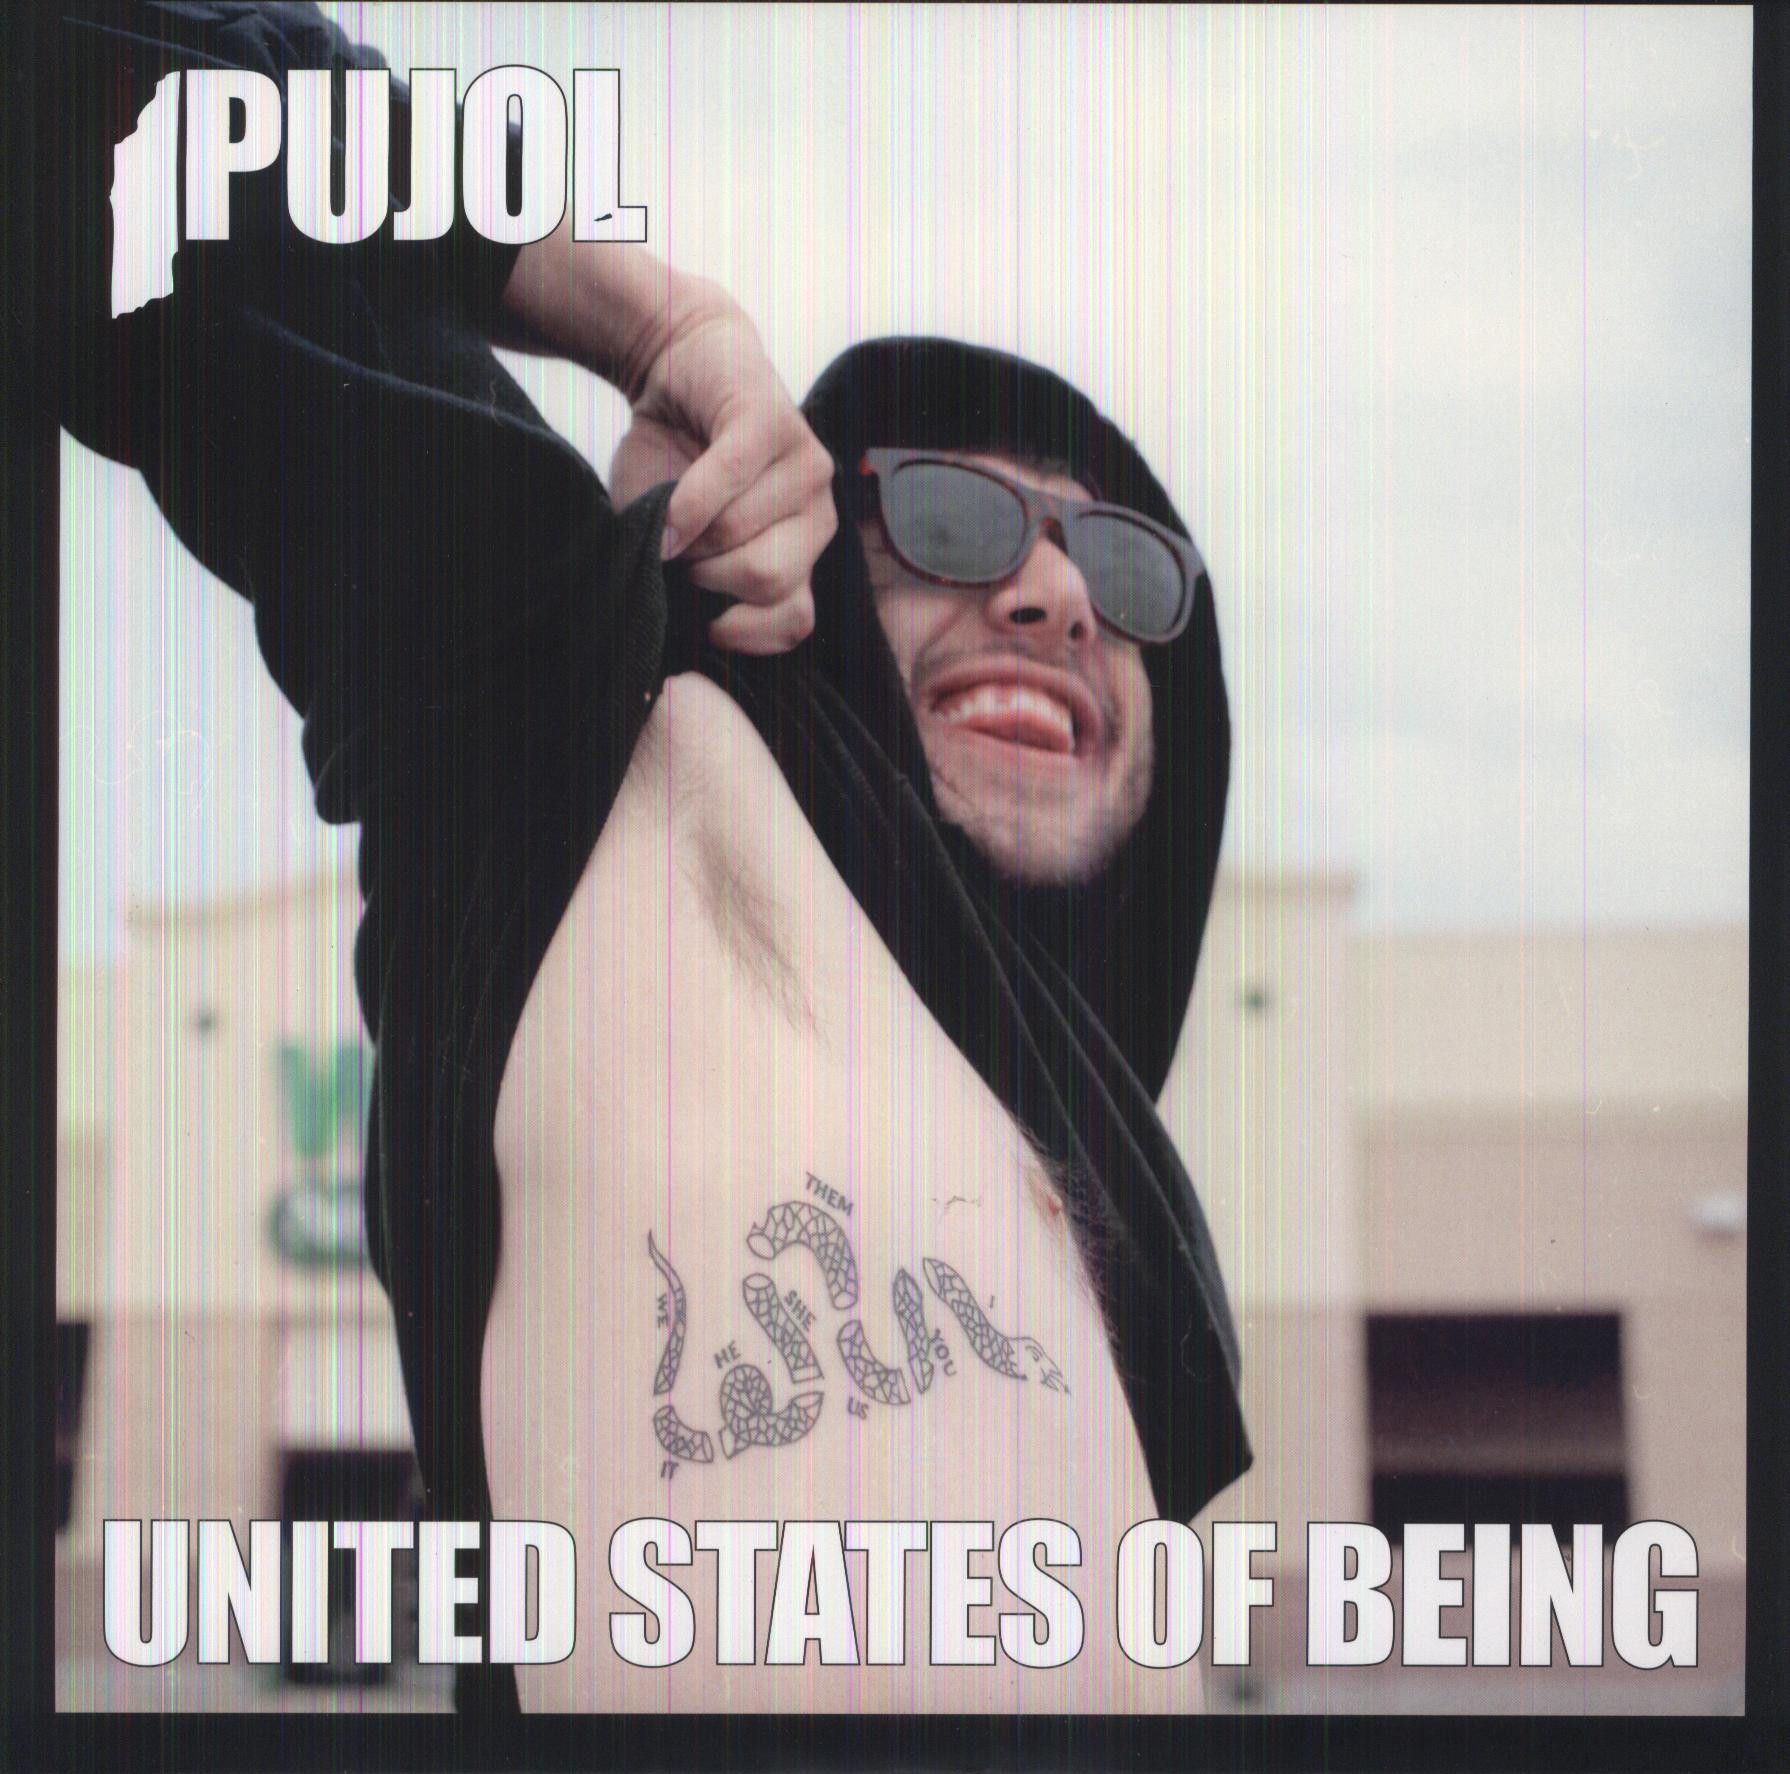 UNITED STATES OF BEING